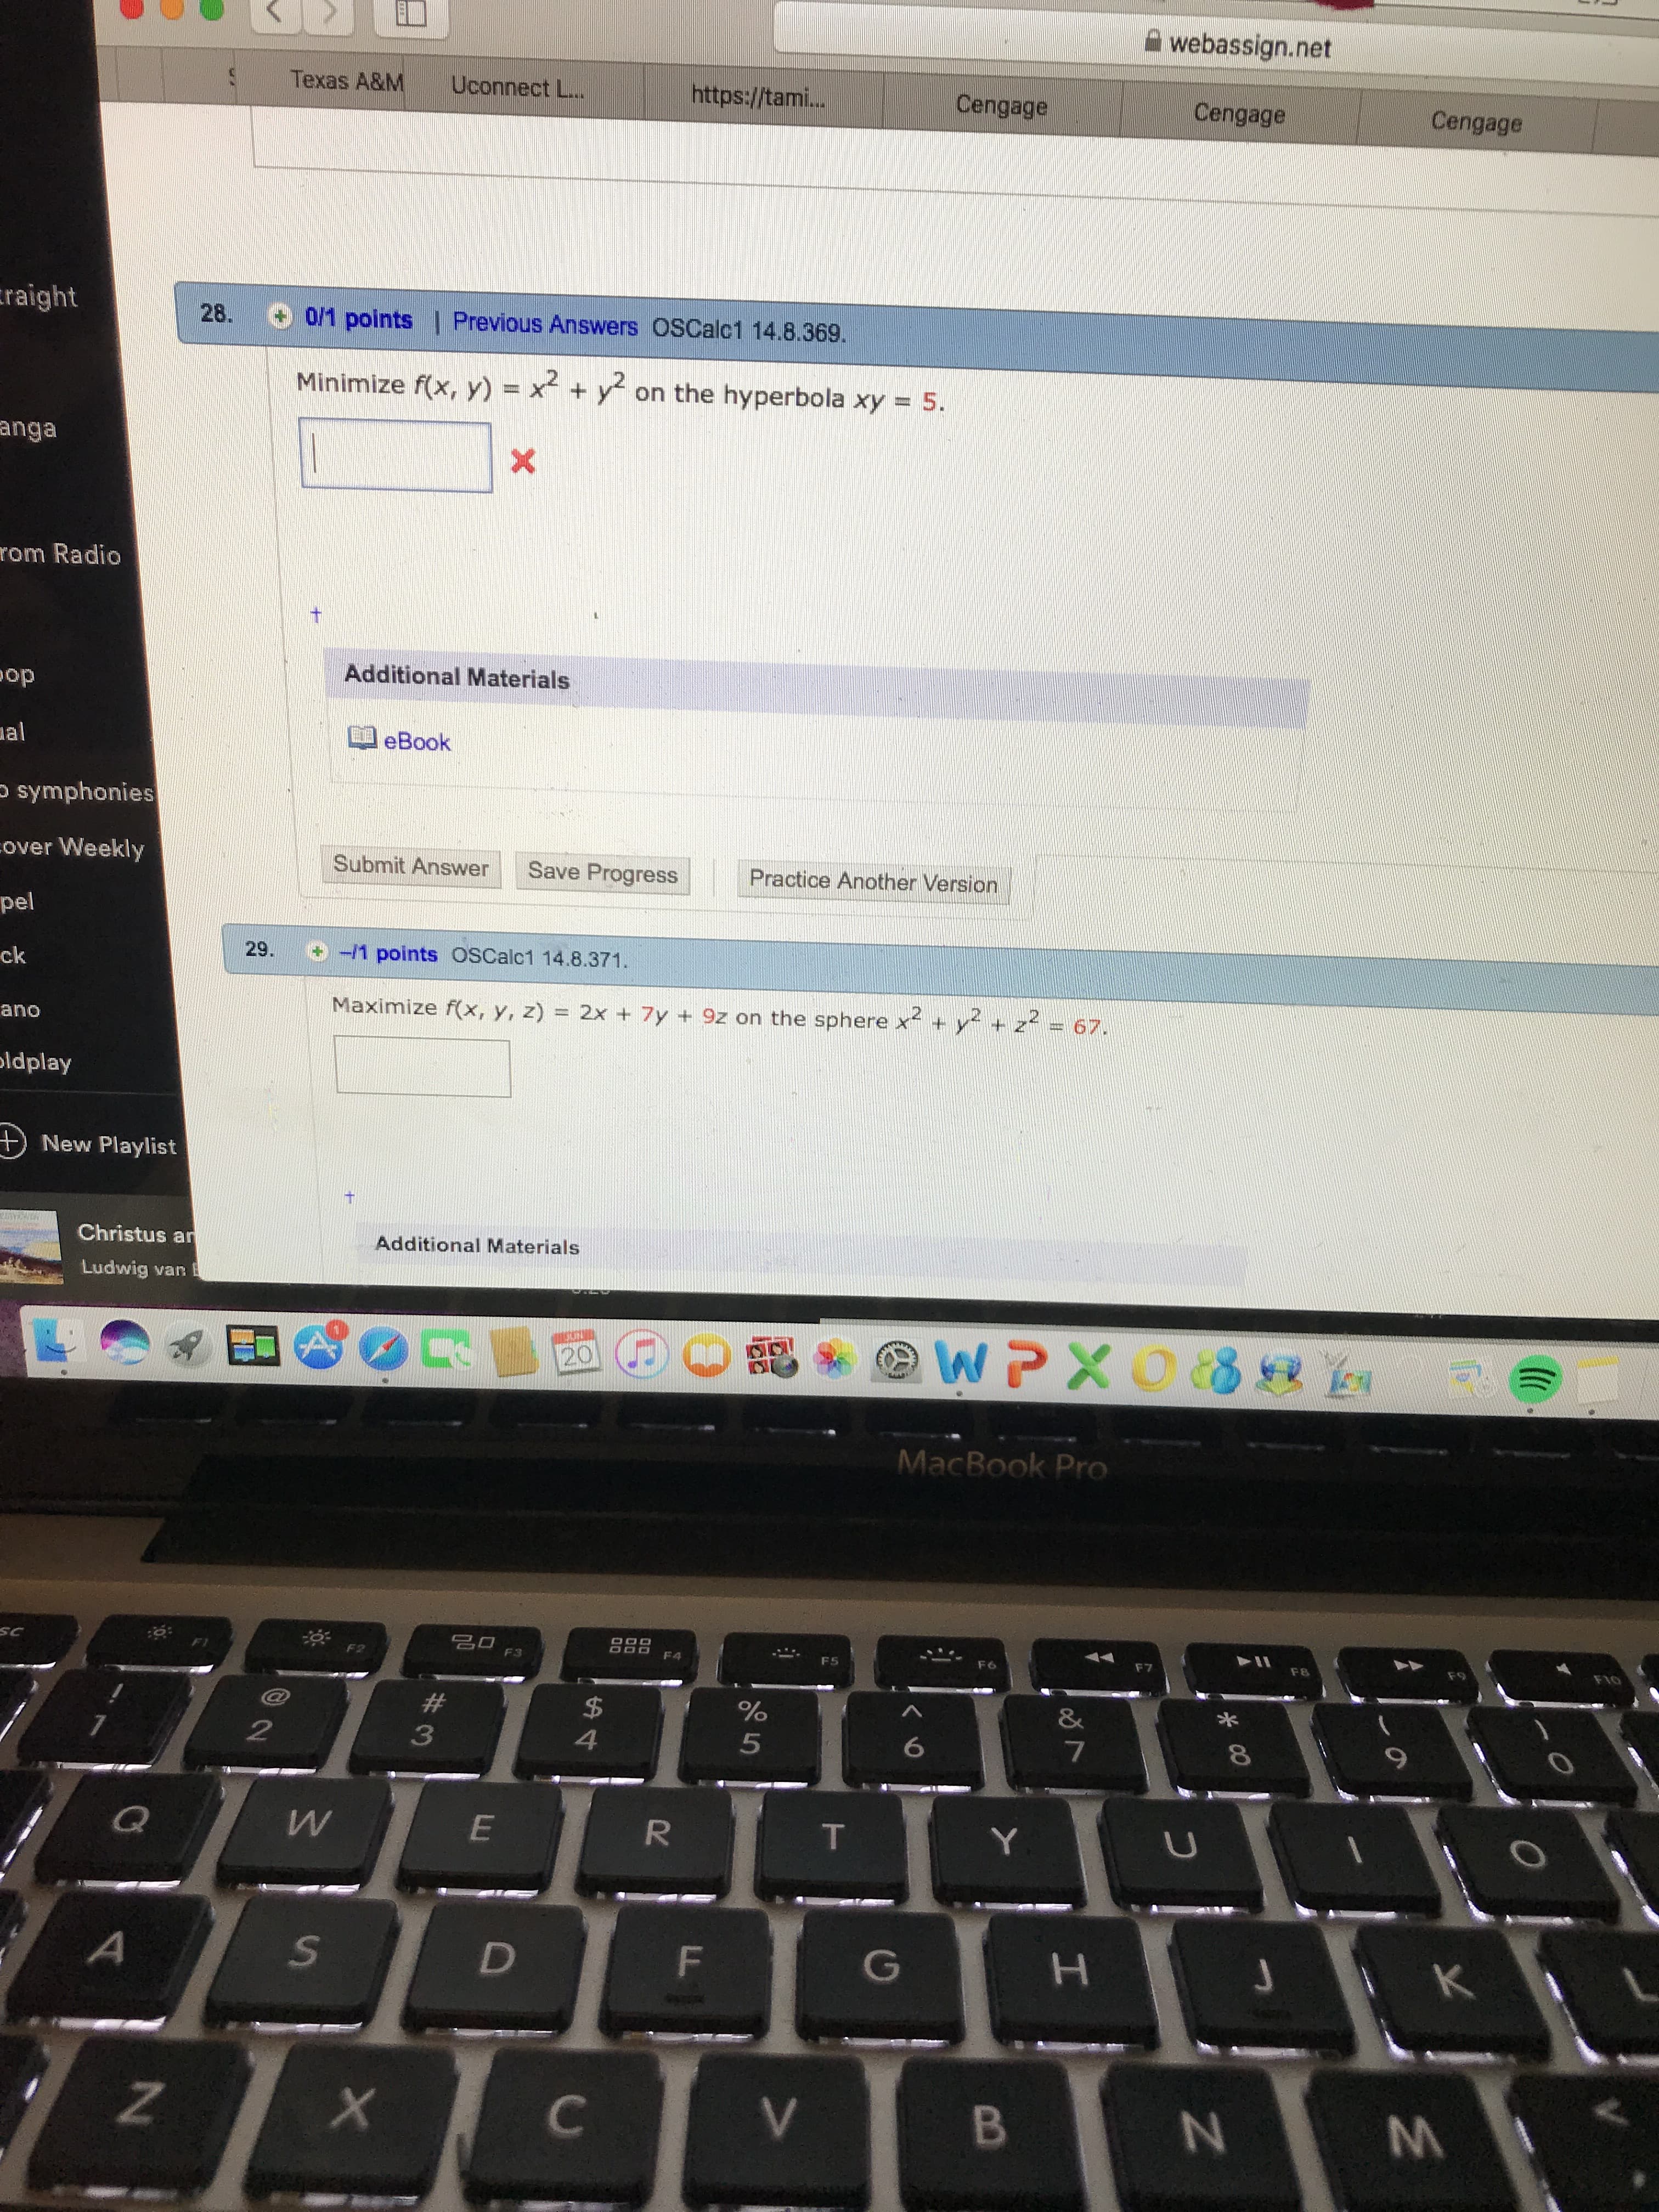 webassign.net
Texas A&M
Uconnect L..
https://tam...
Cengage
Cengage
Cengage
raight
28. 0/1 points| Previous Answers OSCalc1 14.8.369.
Minimize f(x, y) x +y on the hyperbola xy = 5.
anga
X
rom Radio
t
Additional Materials
op
al
eBook
symphonies
over Weekly
Submit Answer
Save Progress
Practice Another Version
pel
29.
-1 points OSCalc1 14.8.371.
ck
Maximize f(x, y, z) = 2x + 7y +9z on the sphere x+ y + z - 67.
ano
ldplay
+) New Playlist
Christus an
Additional Materials
Ludwig
var
GUNMI
WPXO8 a
20
MacBook Pro
SC
FI
F3
F4
F5
F6
F8
F9
OtO
#
$
%
&
2
4
6
Ww
Q
E
R
T
Y
A
D
F
K
Z
X
C
B
O
tAA
3
